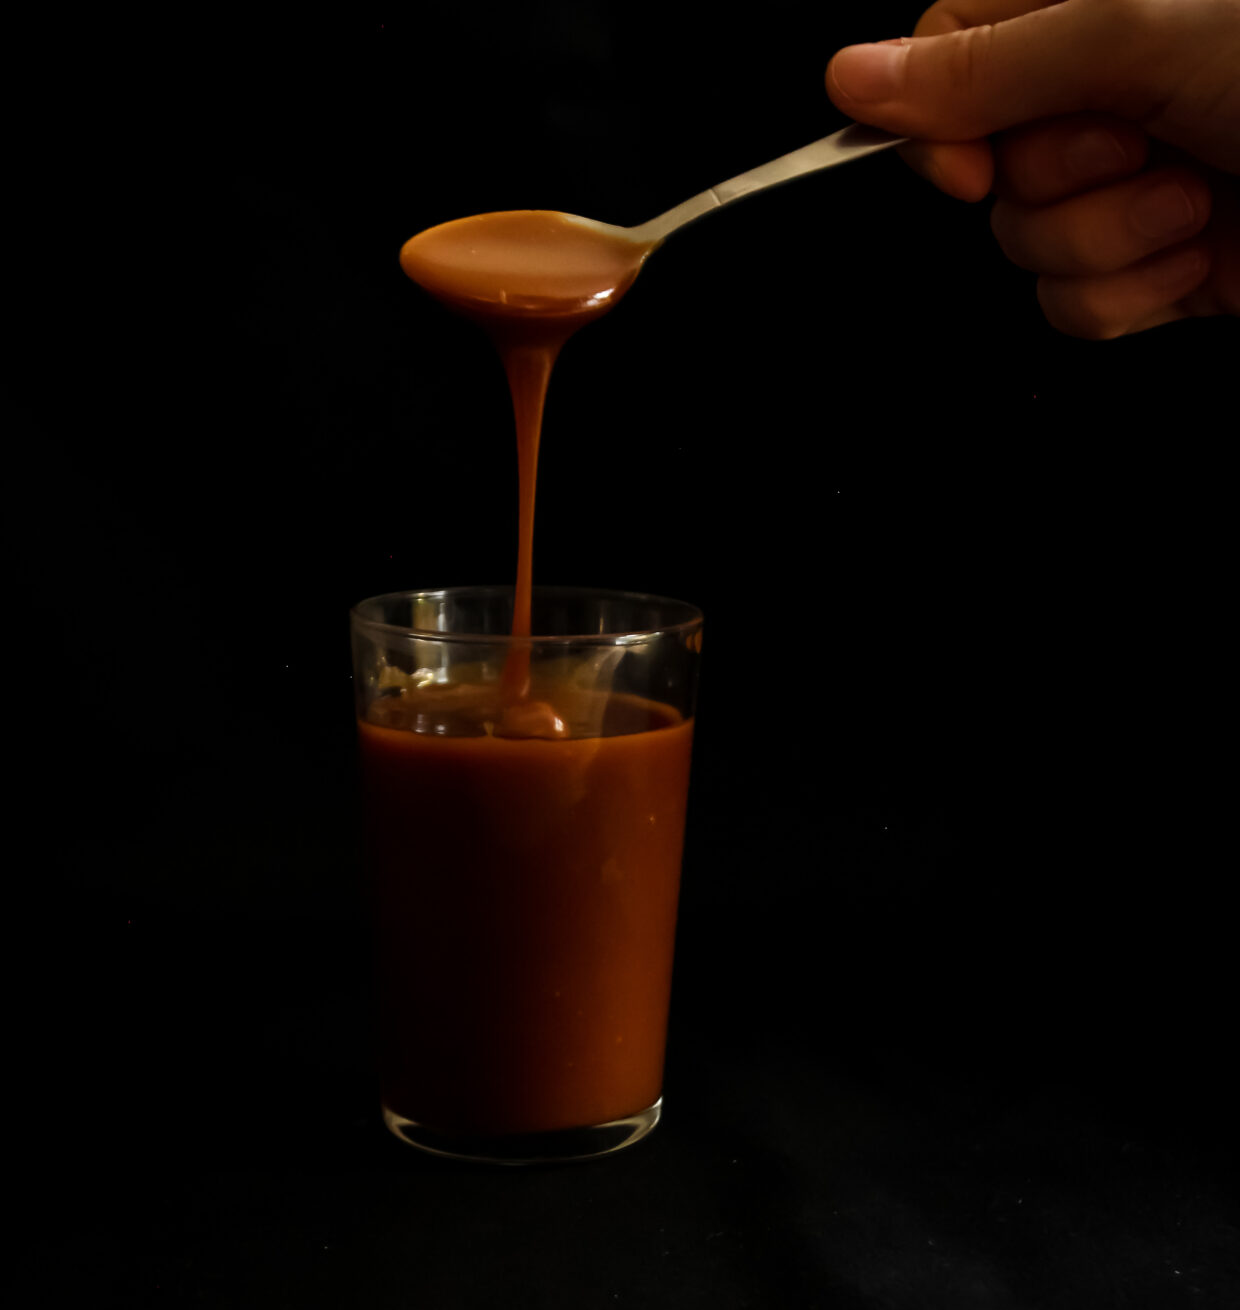 image description; Set on a black background we can see a glass filled with golden brown salted caramel, above the glass there is a spoon and ribbons of salted caramel are falling back into the glass reflecting the light.